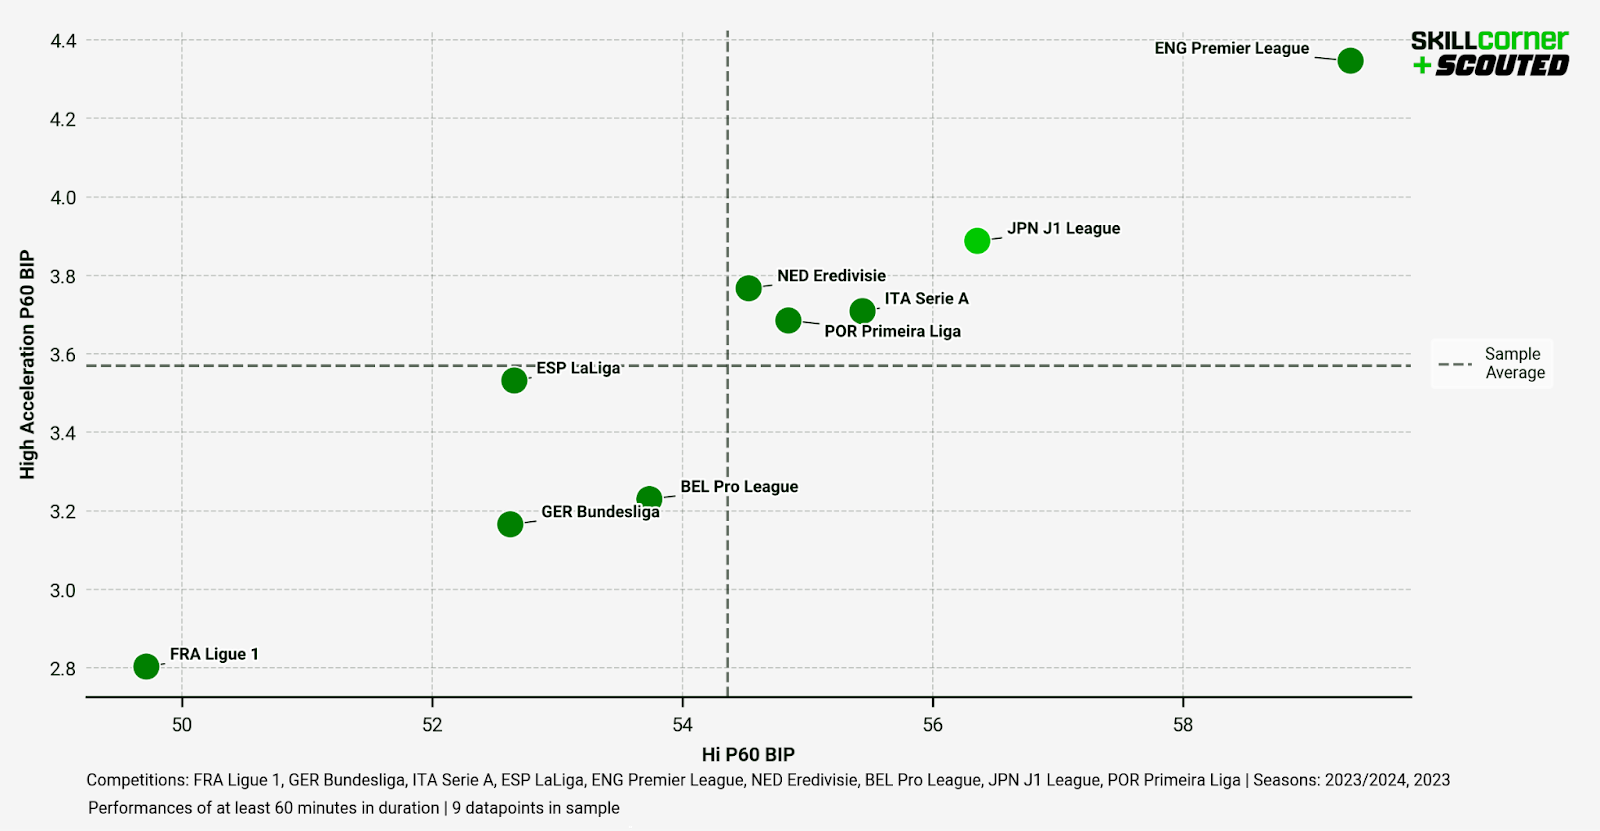 A SCOUTED-SkillCorner scatter graph plotting athleticism and intensity of Europe's top eight leagues and the J.LEAGUE.